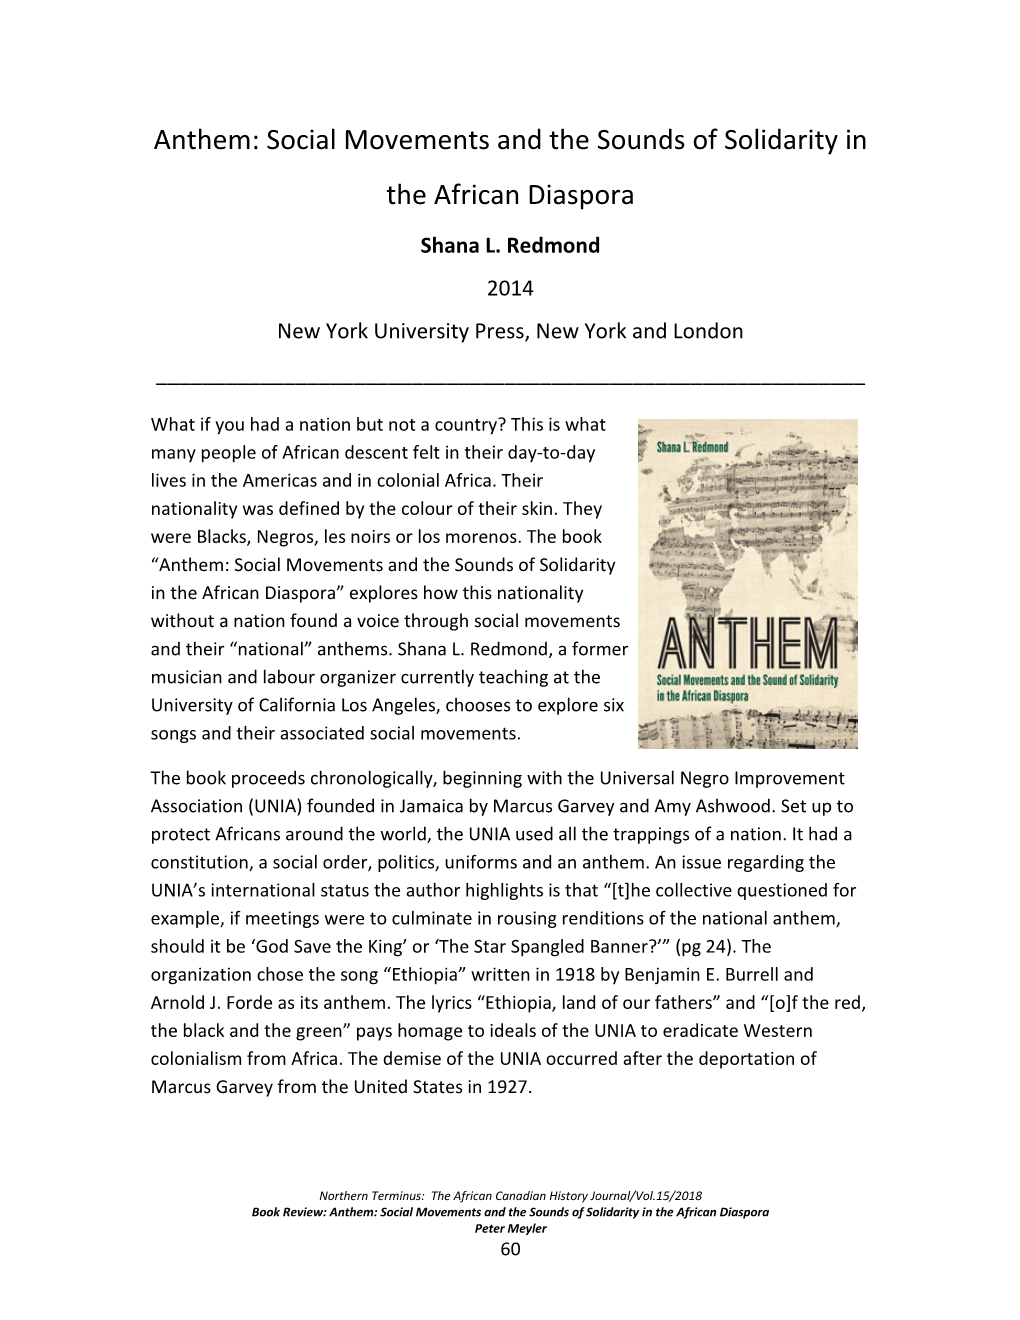 Anthem: Social Movements and the Sounds of Solidarity in the African Diaspora